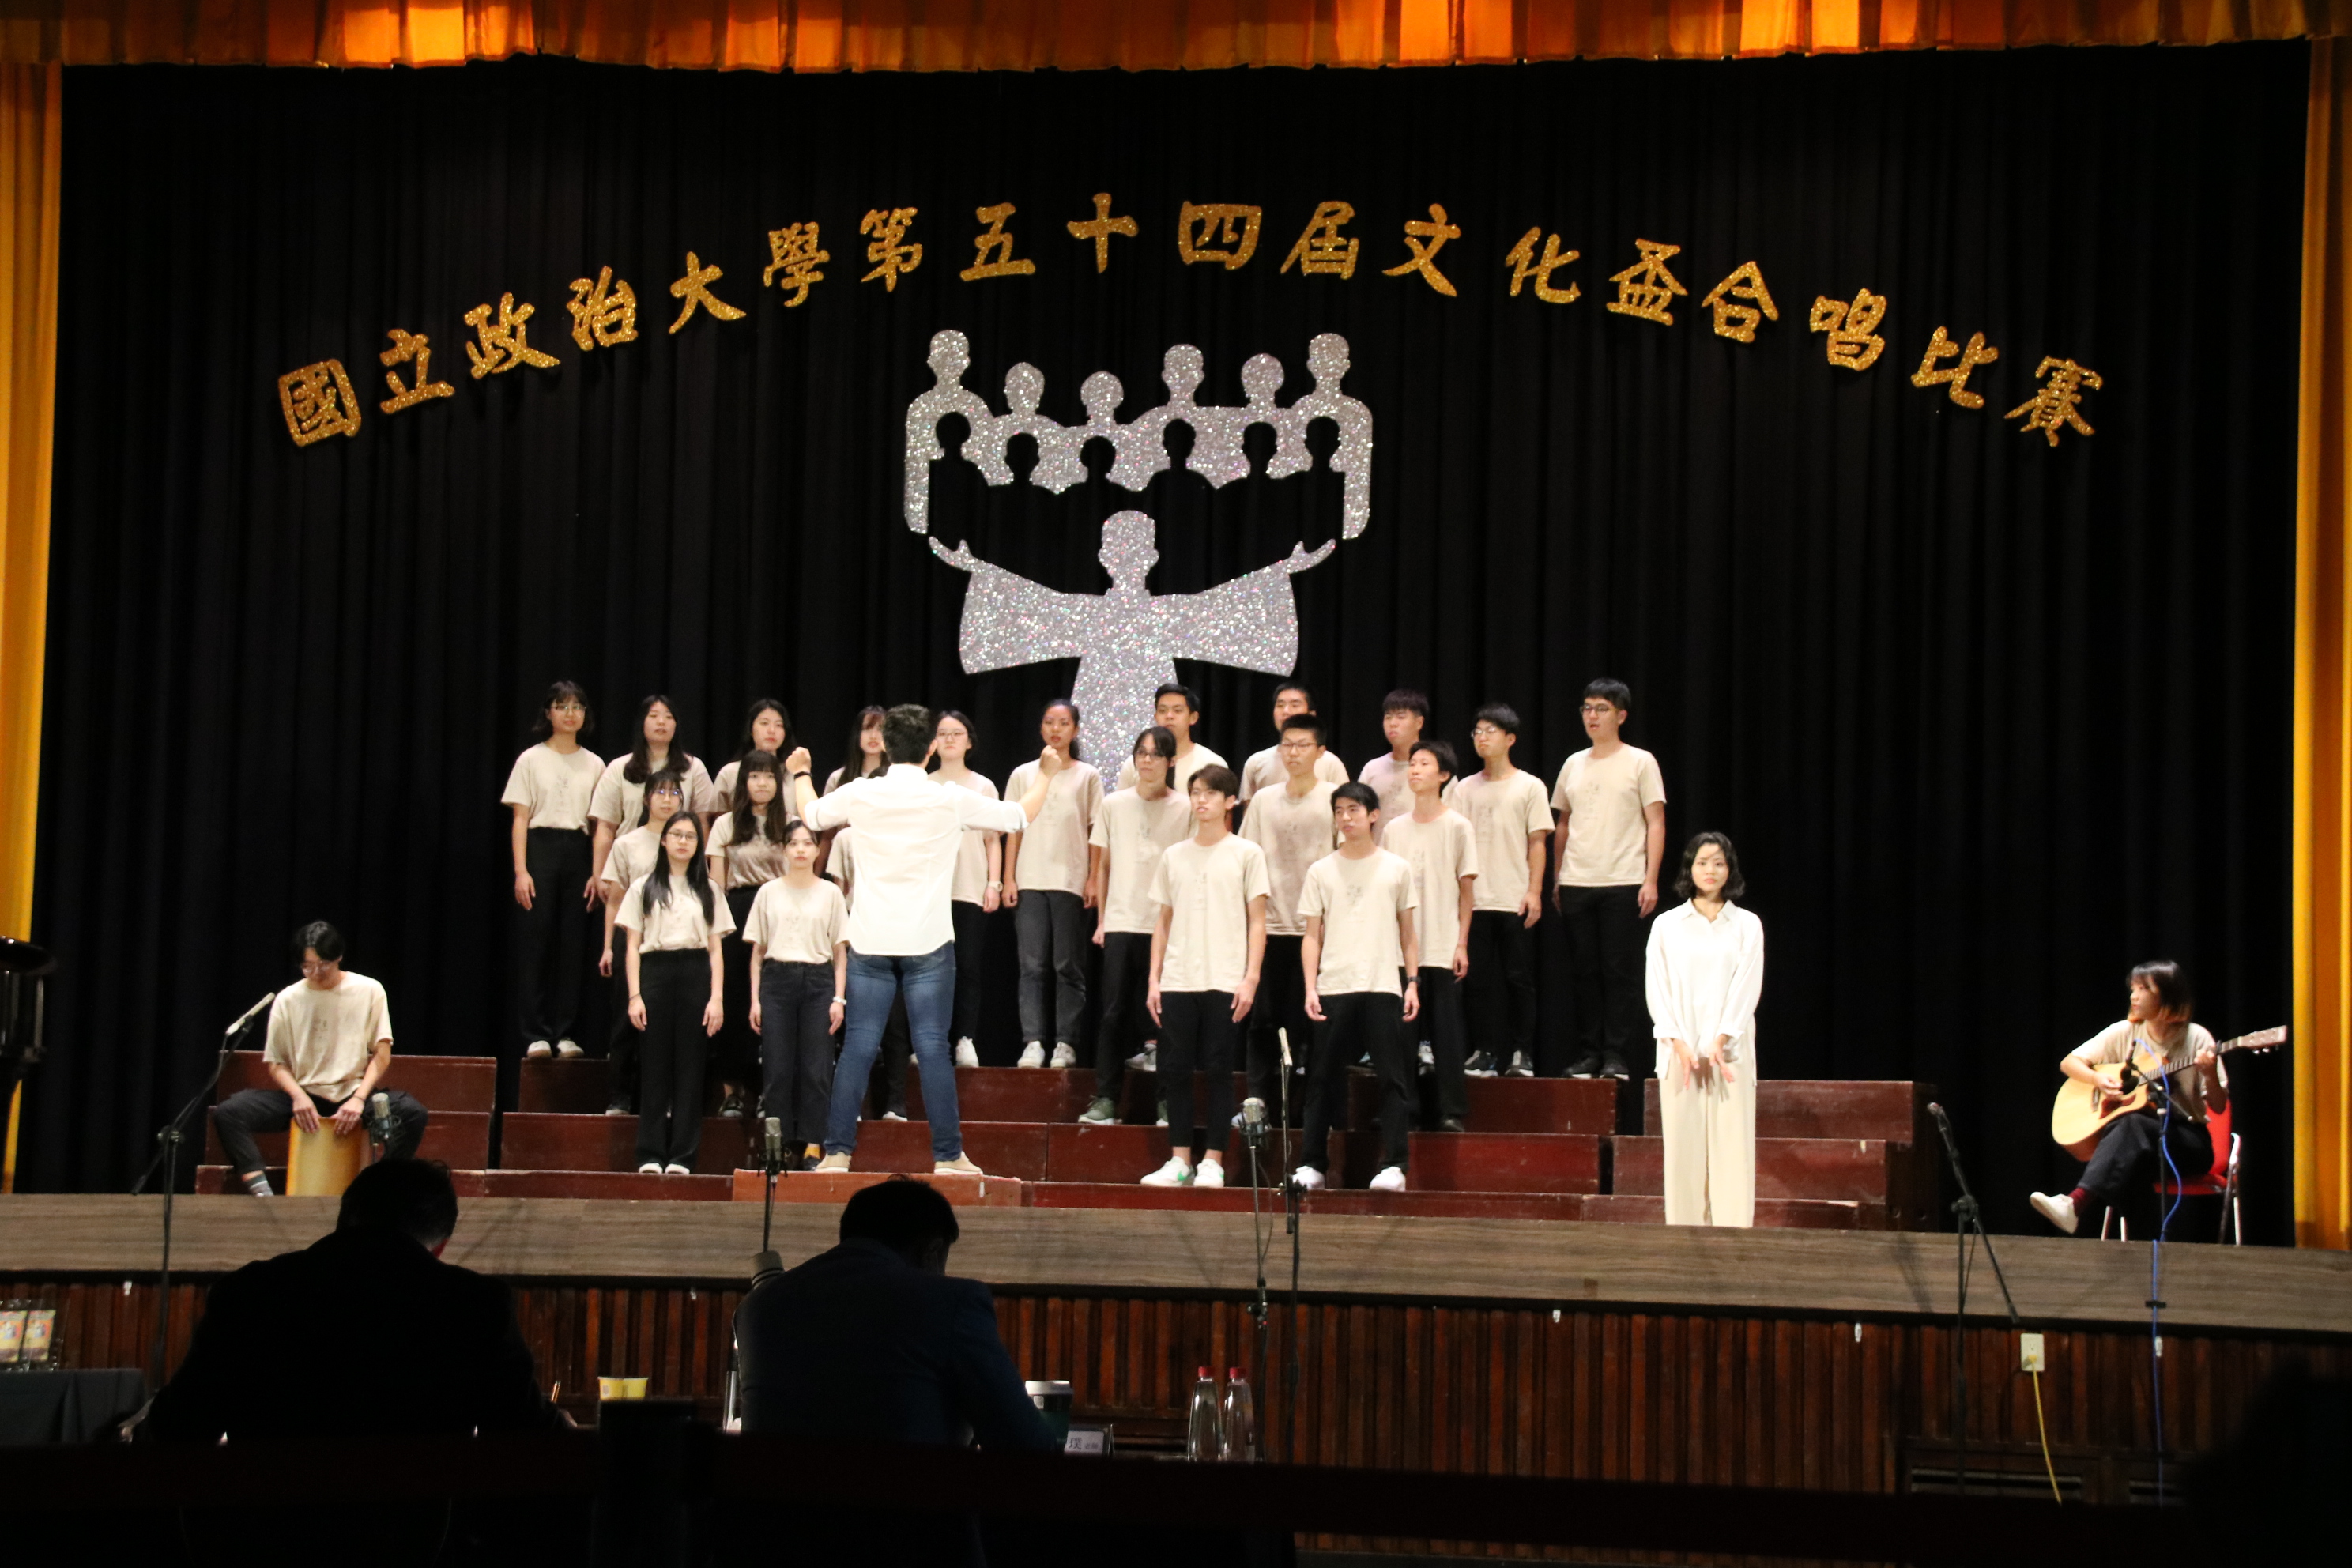 Congratulations to our students who won the 6th Award for Cultural Cup Choir Competition